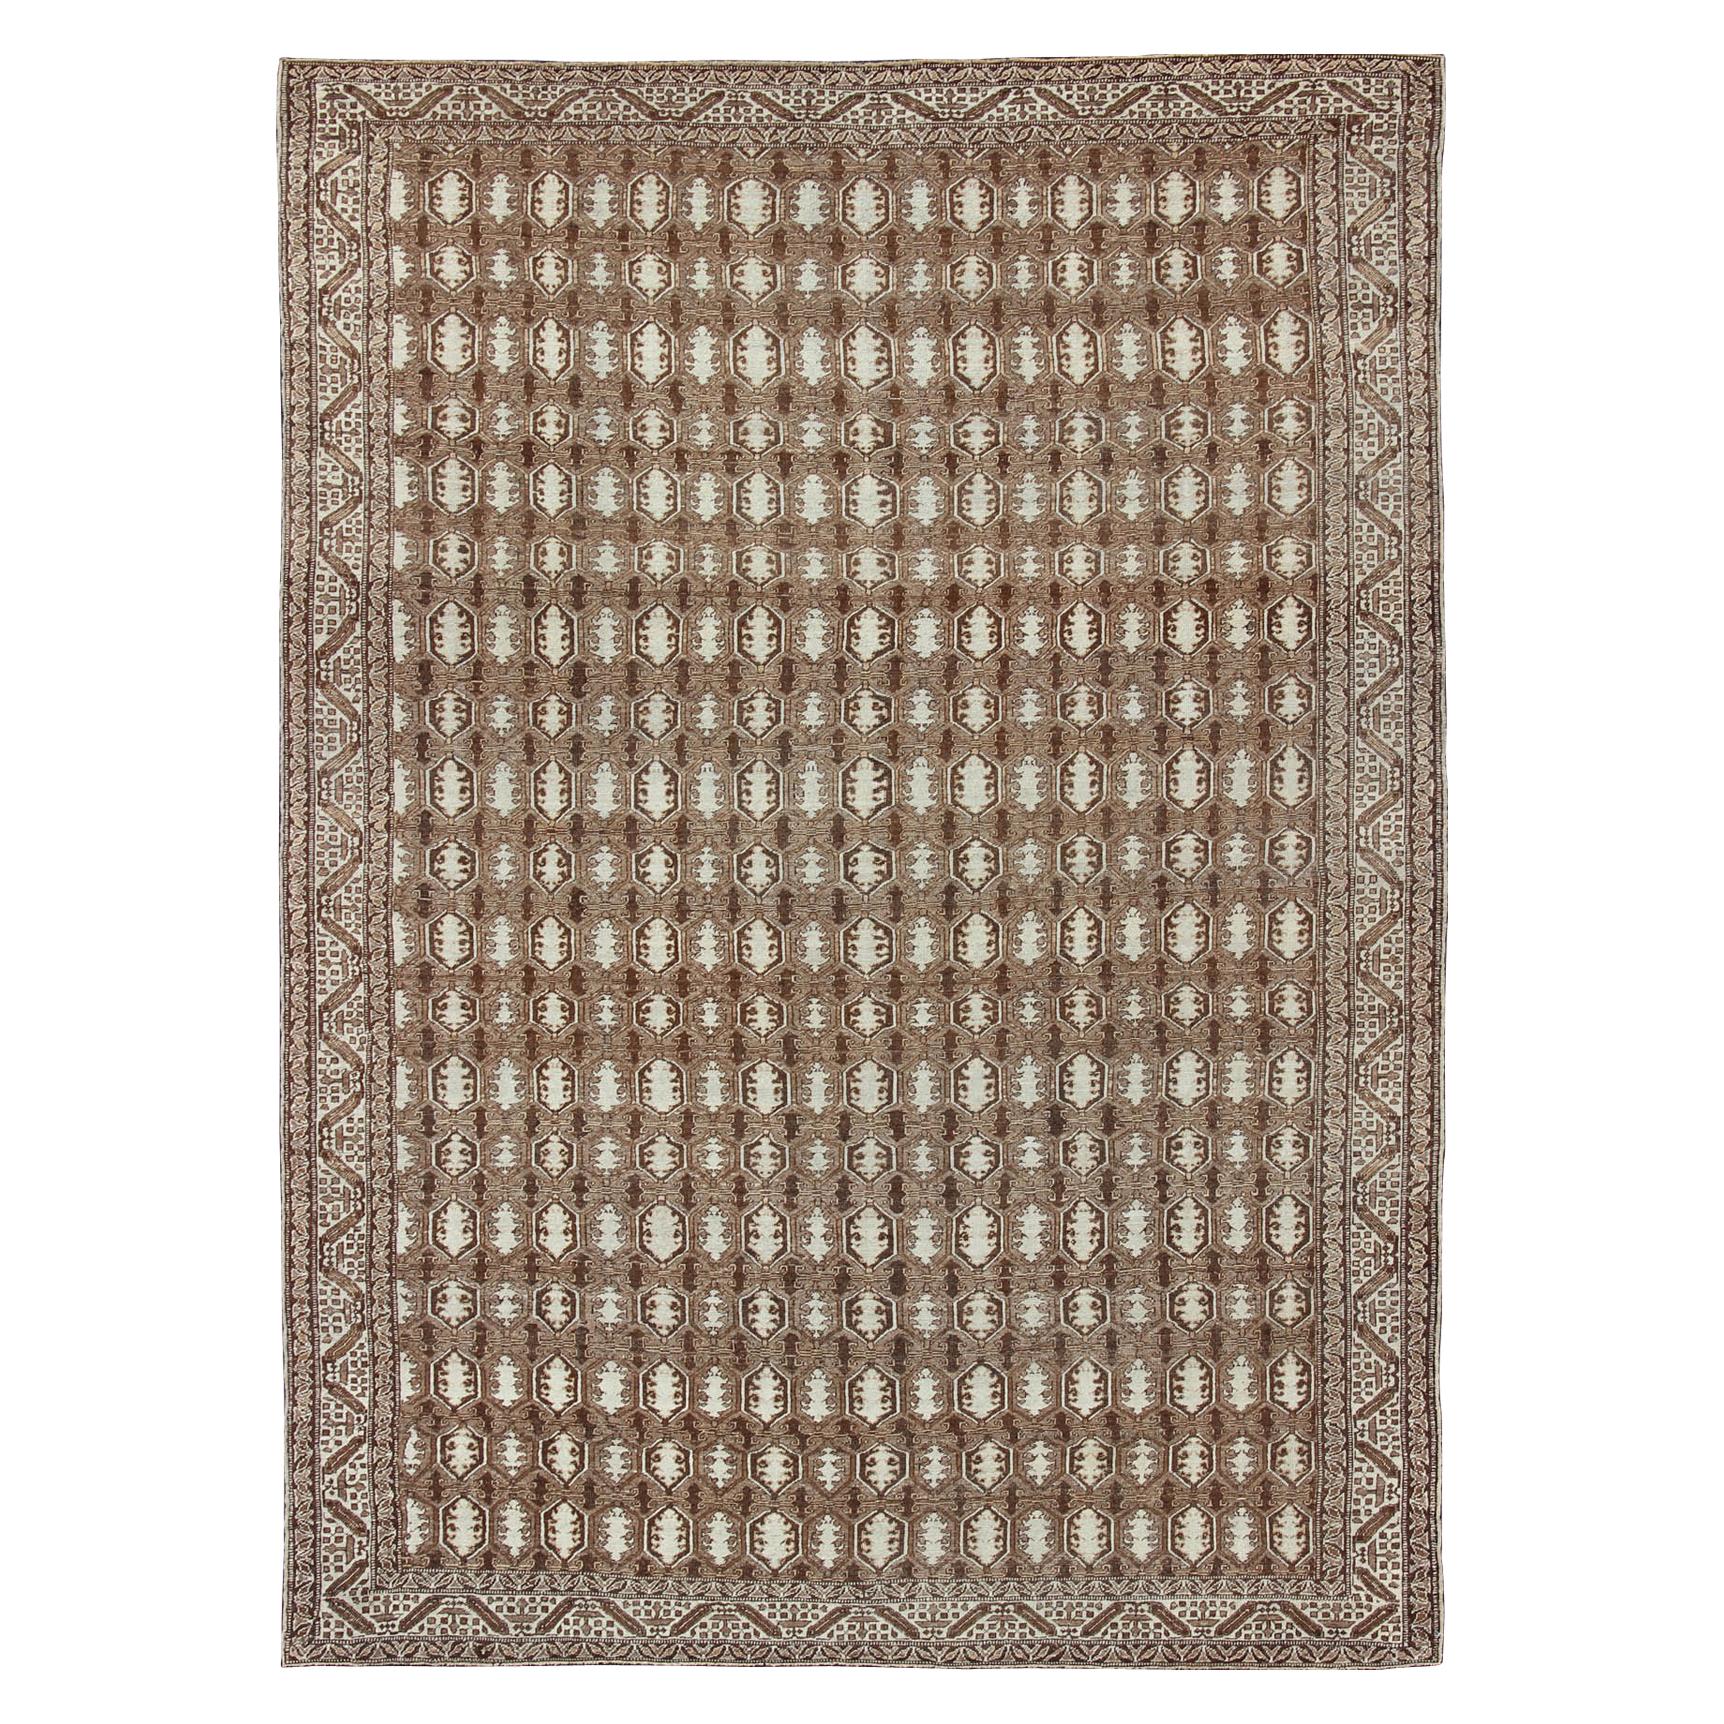 Antique Turkish Rug with Organic Motifs in Brown, Taupe, and Earth Tone Colors For Sale